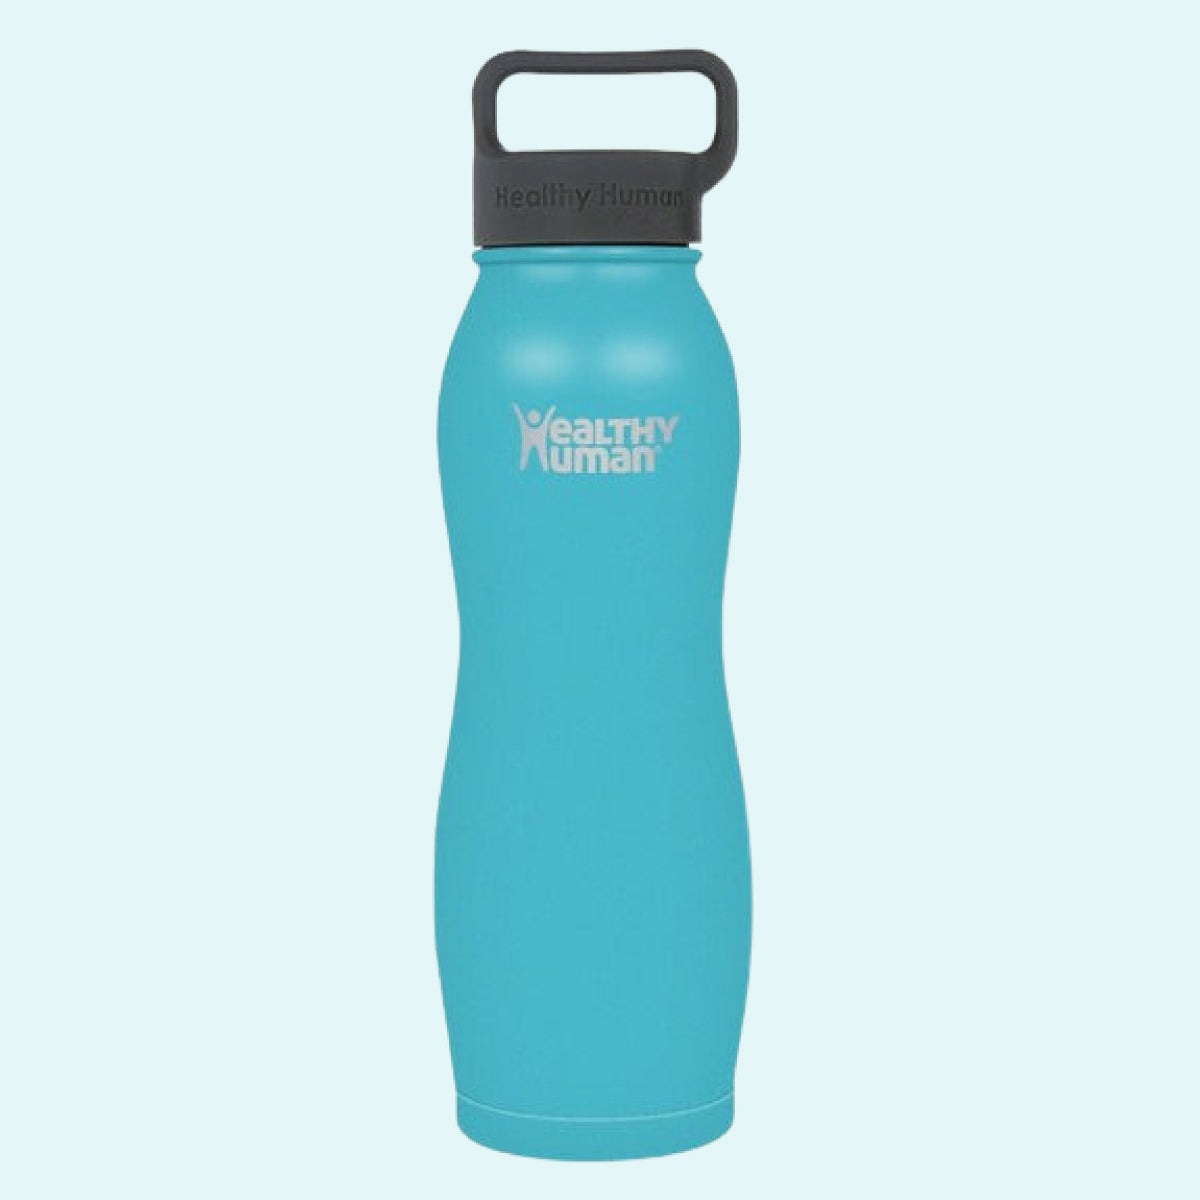 What Is The Healthiest Water Bottle To Use?